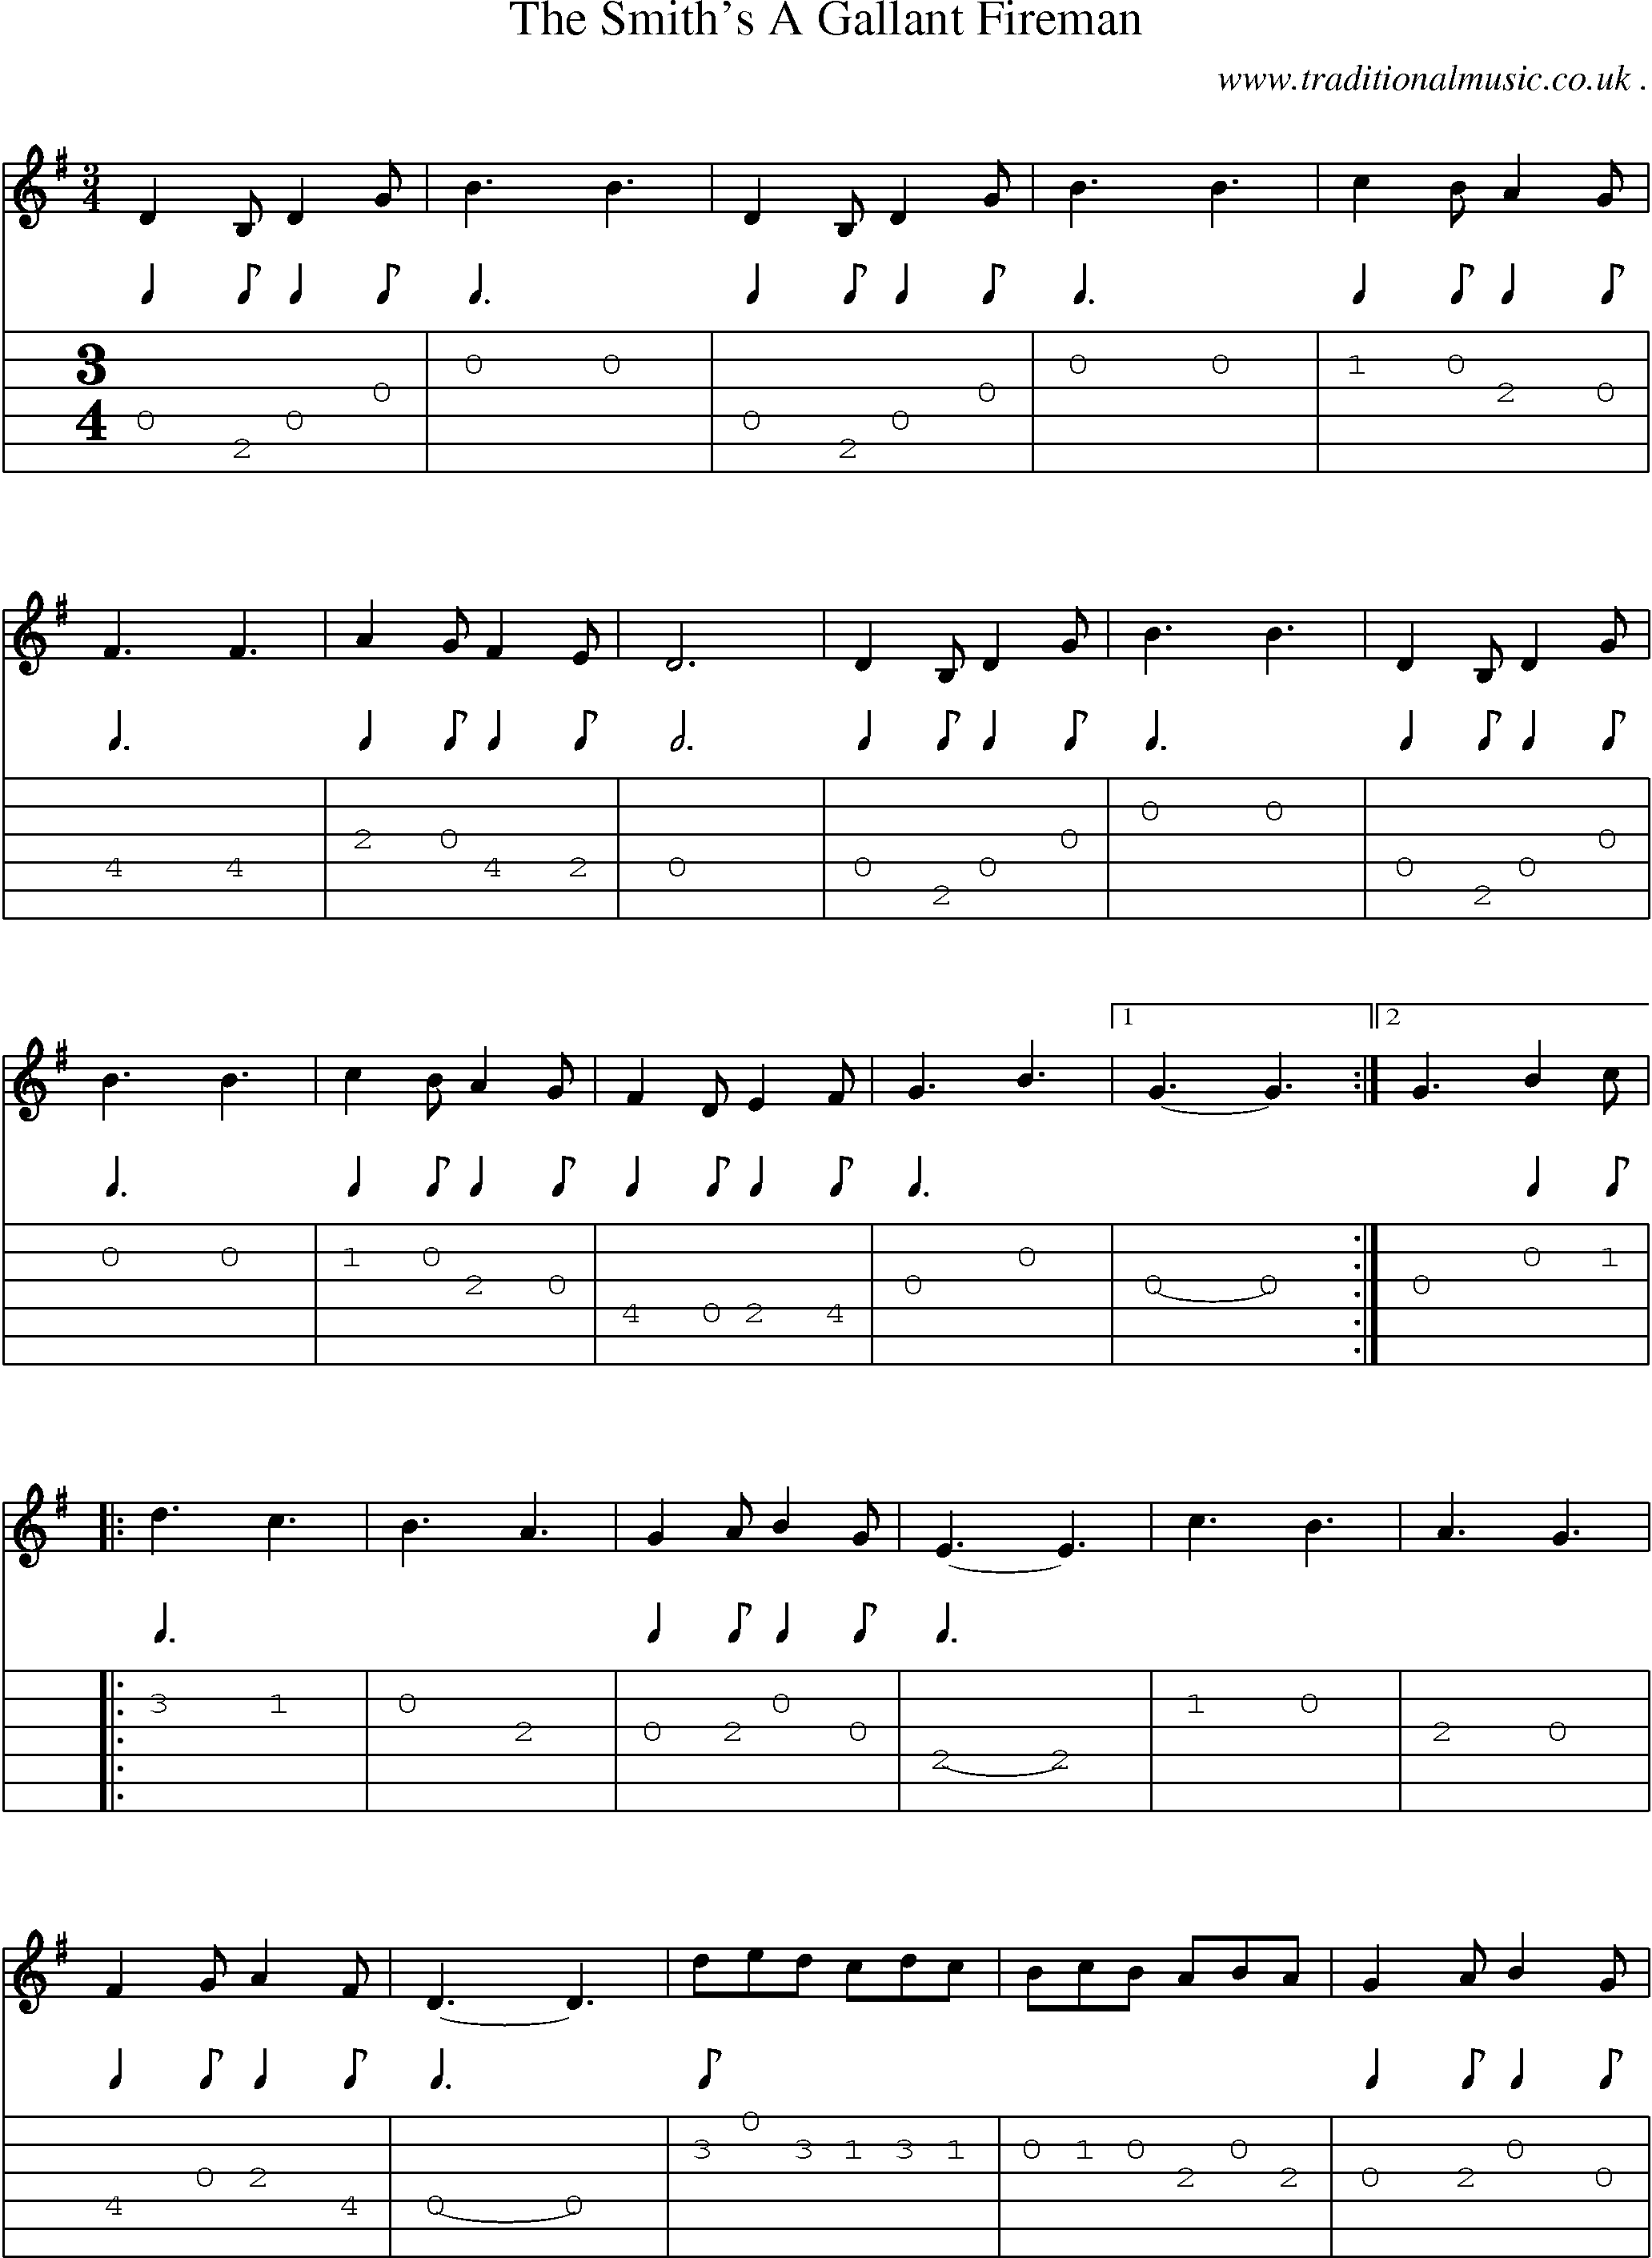 Sheet-Music and Guitar Tabs for The Smiths A Gallant Fireman